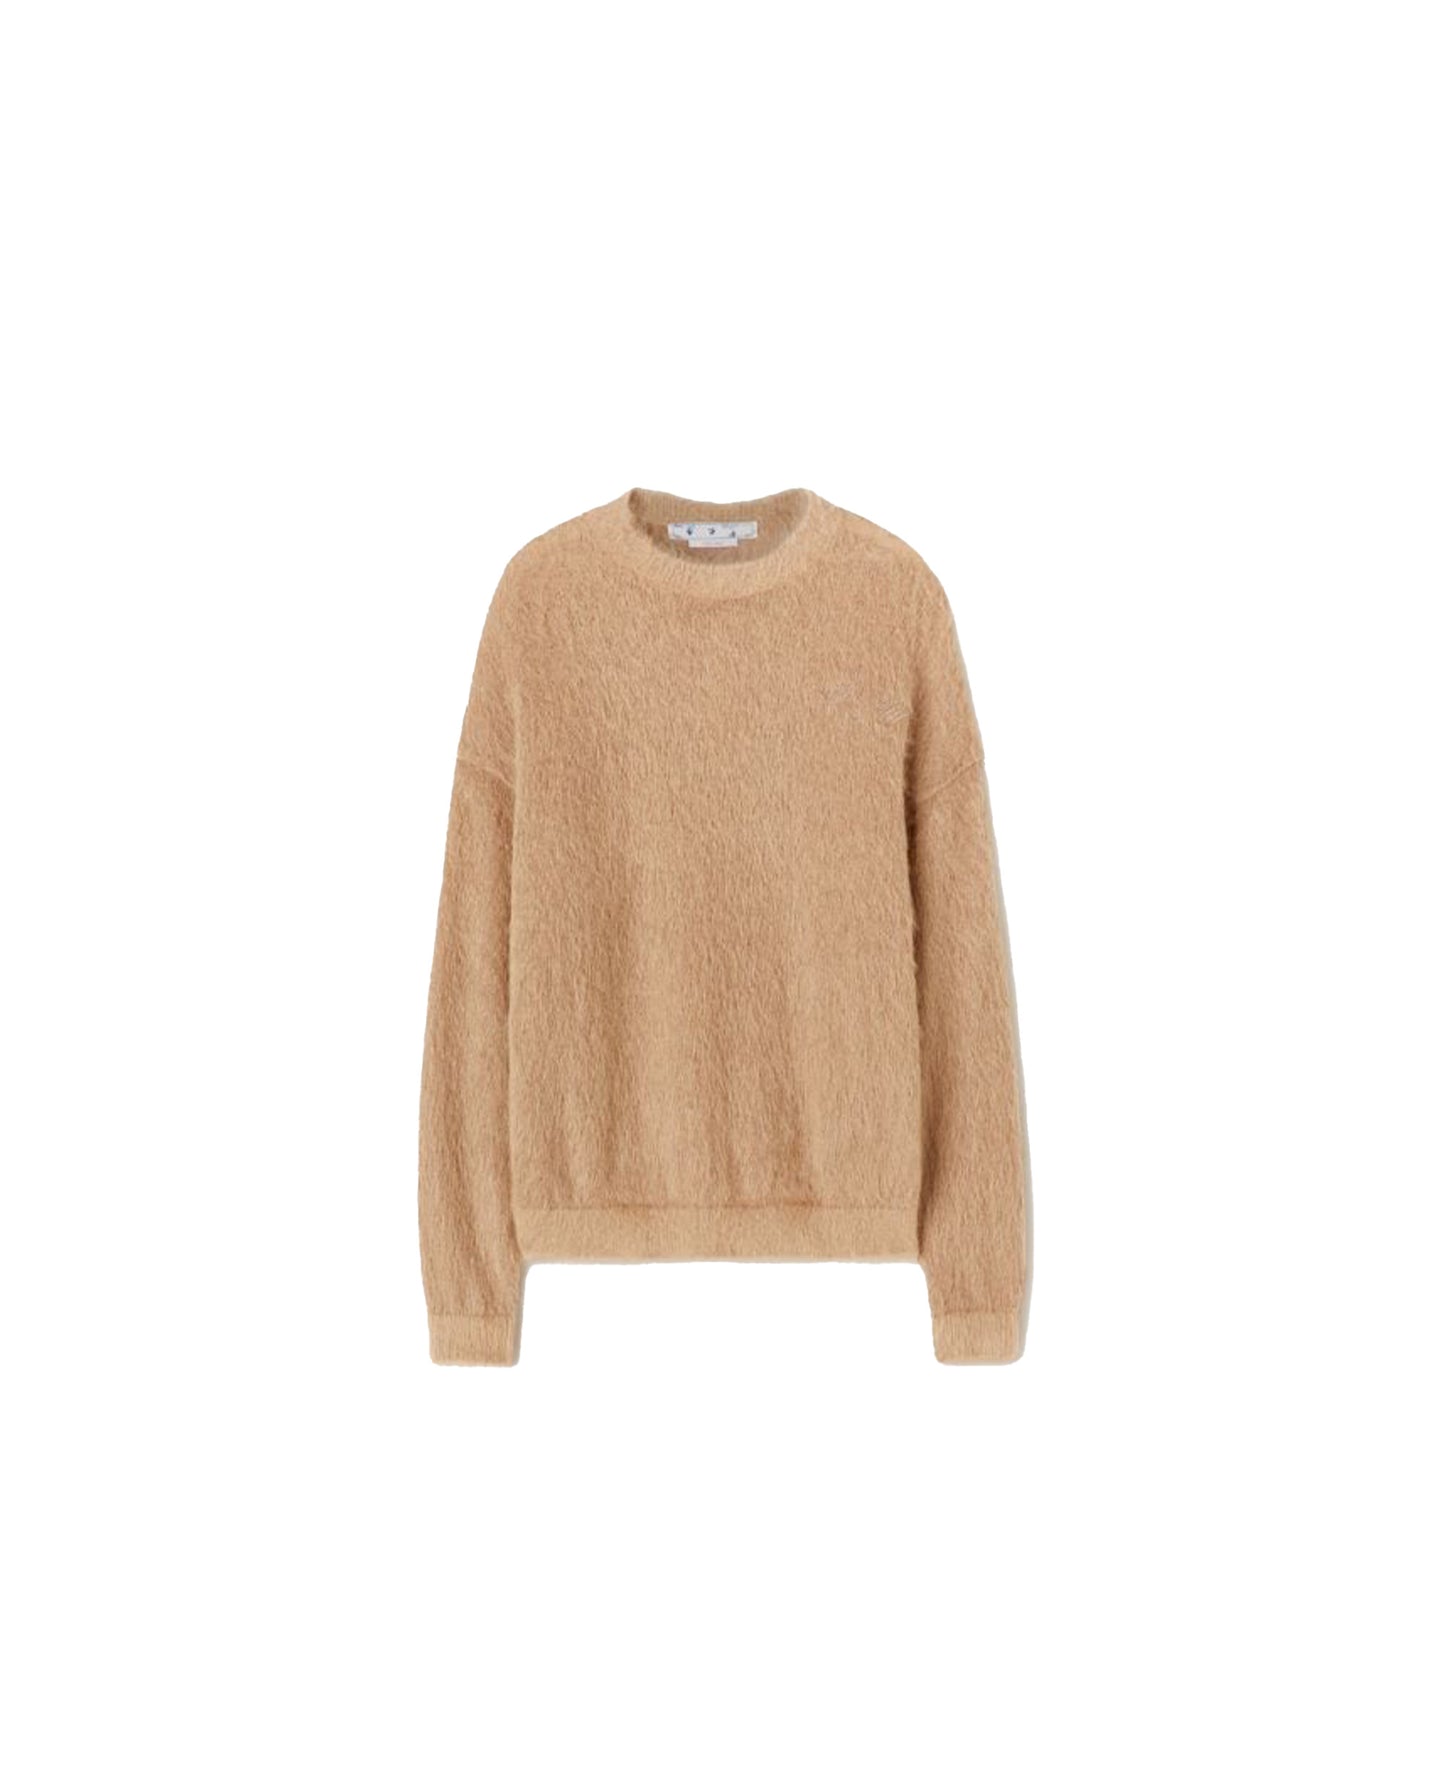 Off-White Arrow Mohair Skate Knit Crew Camel | STASHED